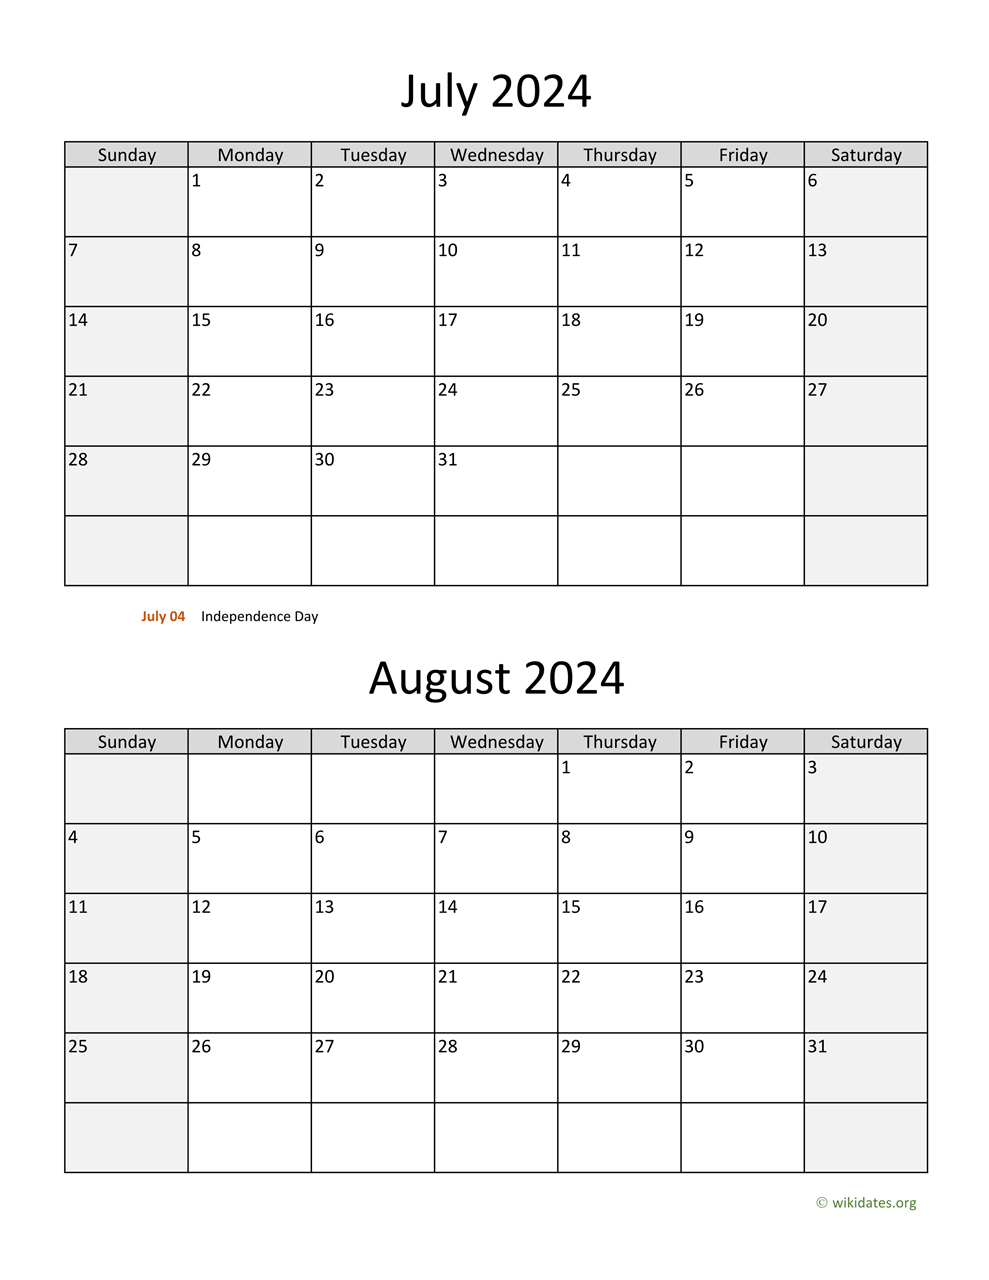 July And August 2024 Calendar | Wikidates | Printable Calendar 2024 June July August